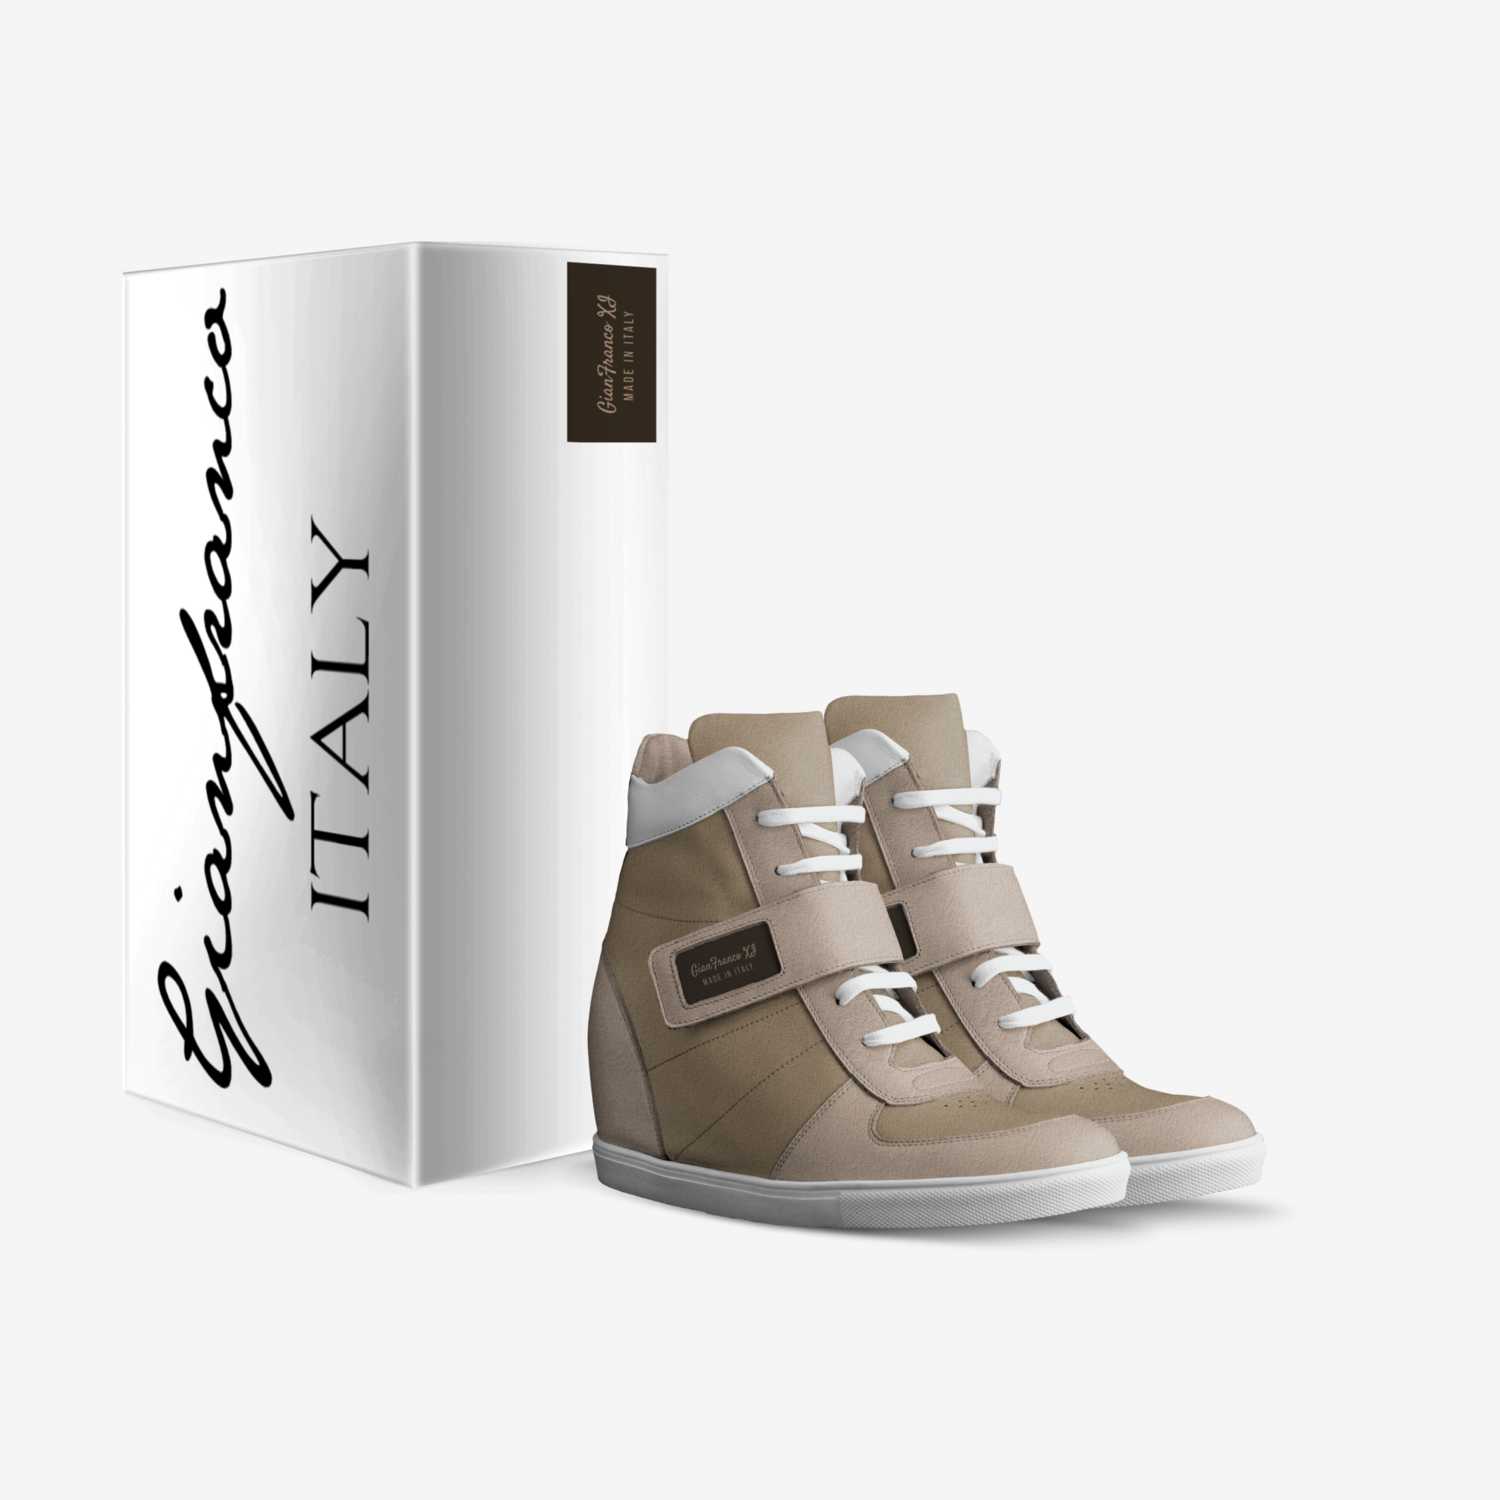 GianFranco XI custom made in Italy shoes by Jason Best | Box view